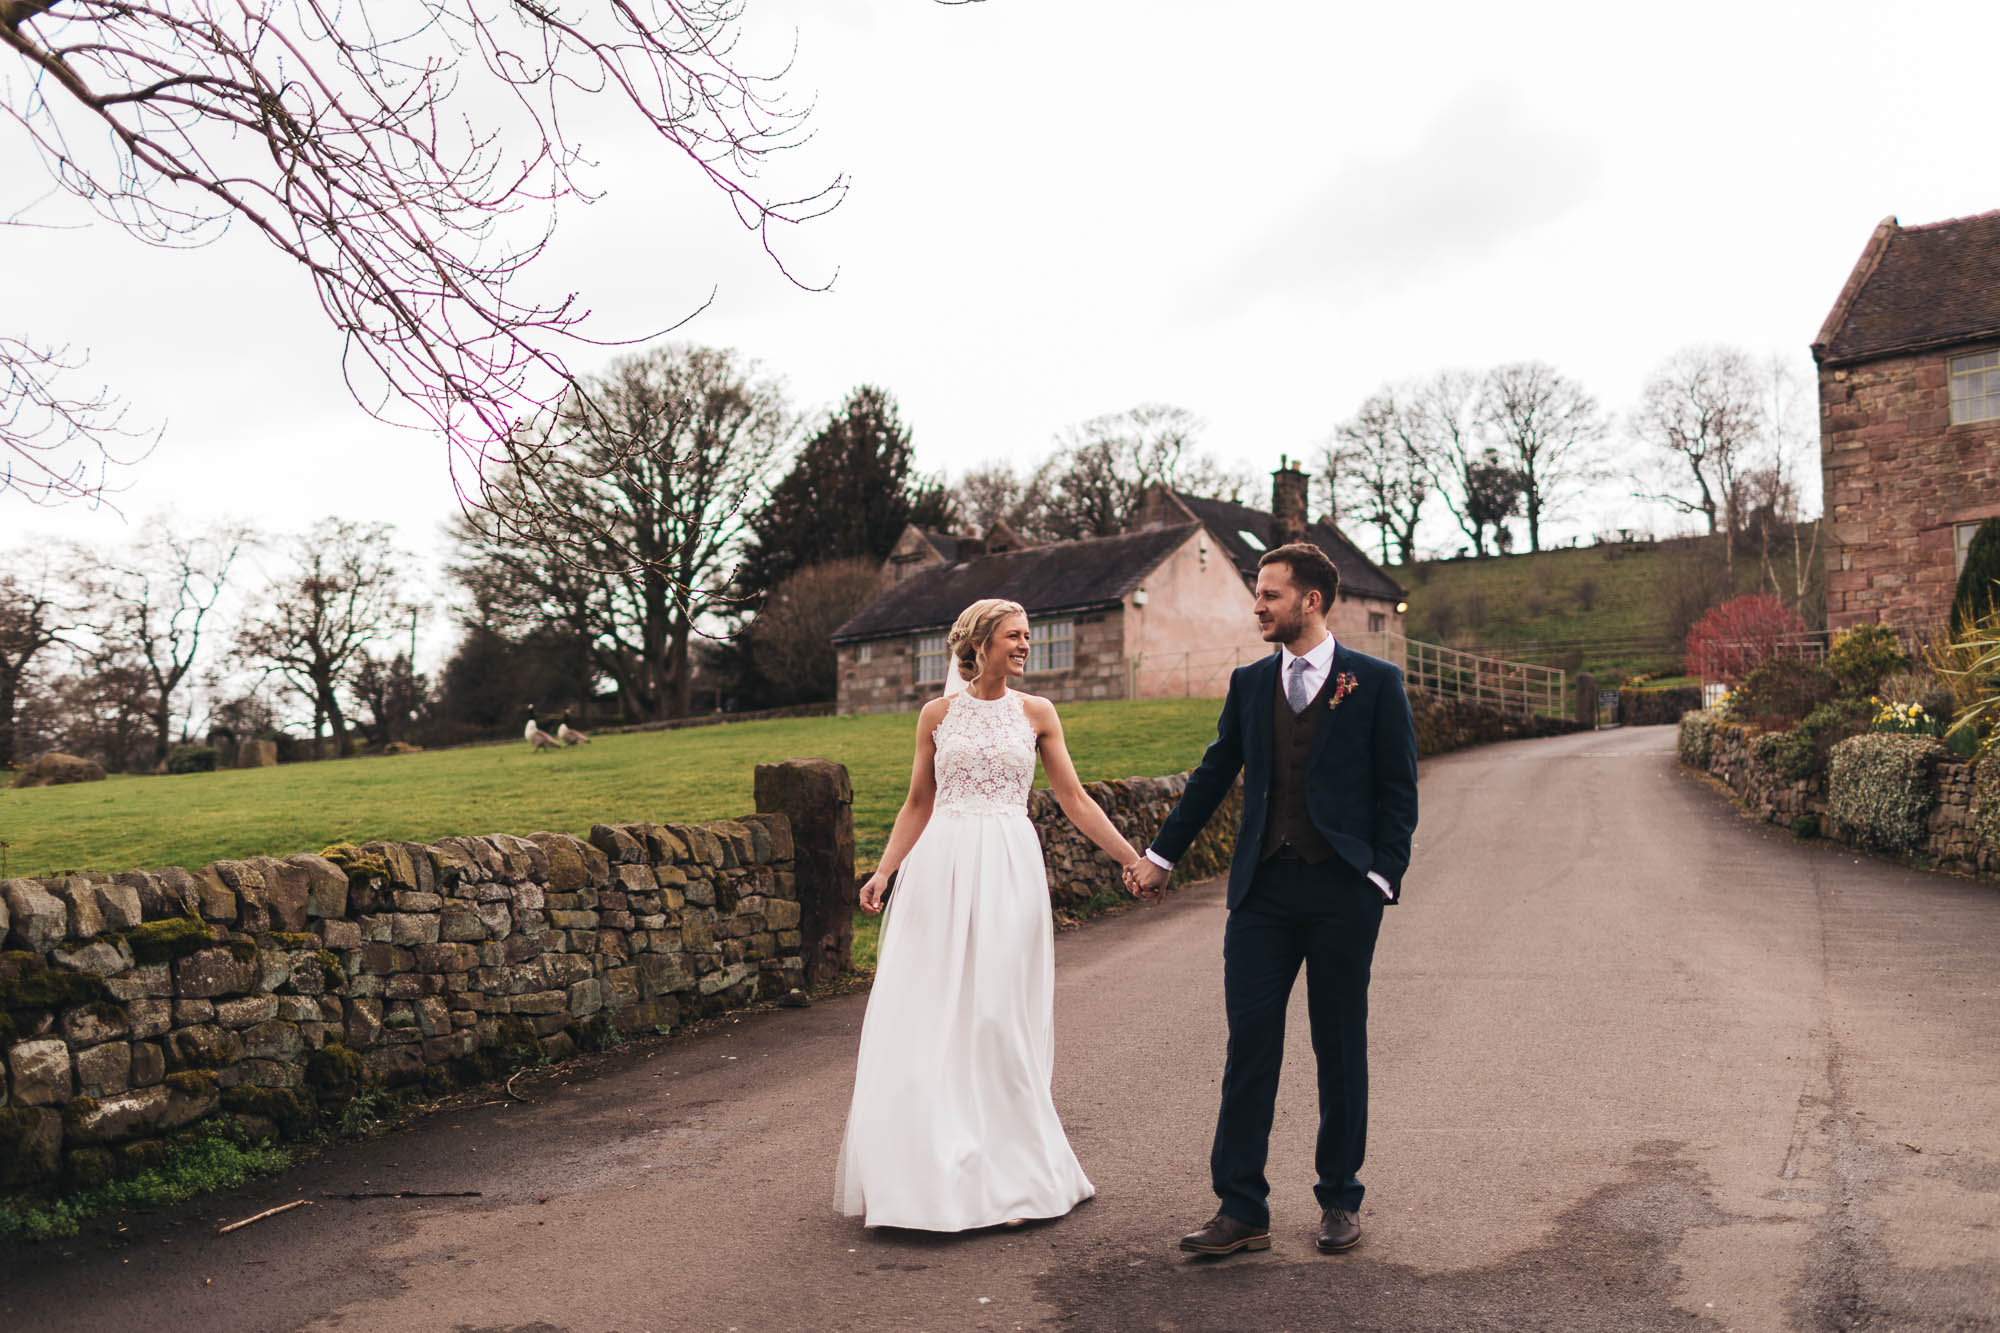 Bride and Groom hold hands and go for a wander after getting married with rustic barns in background